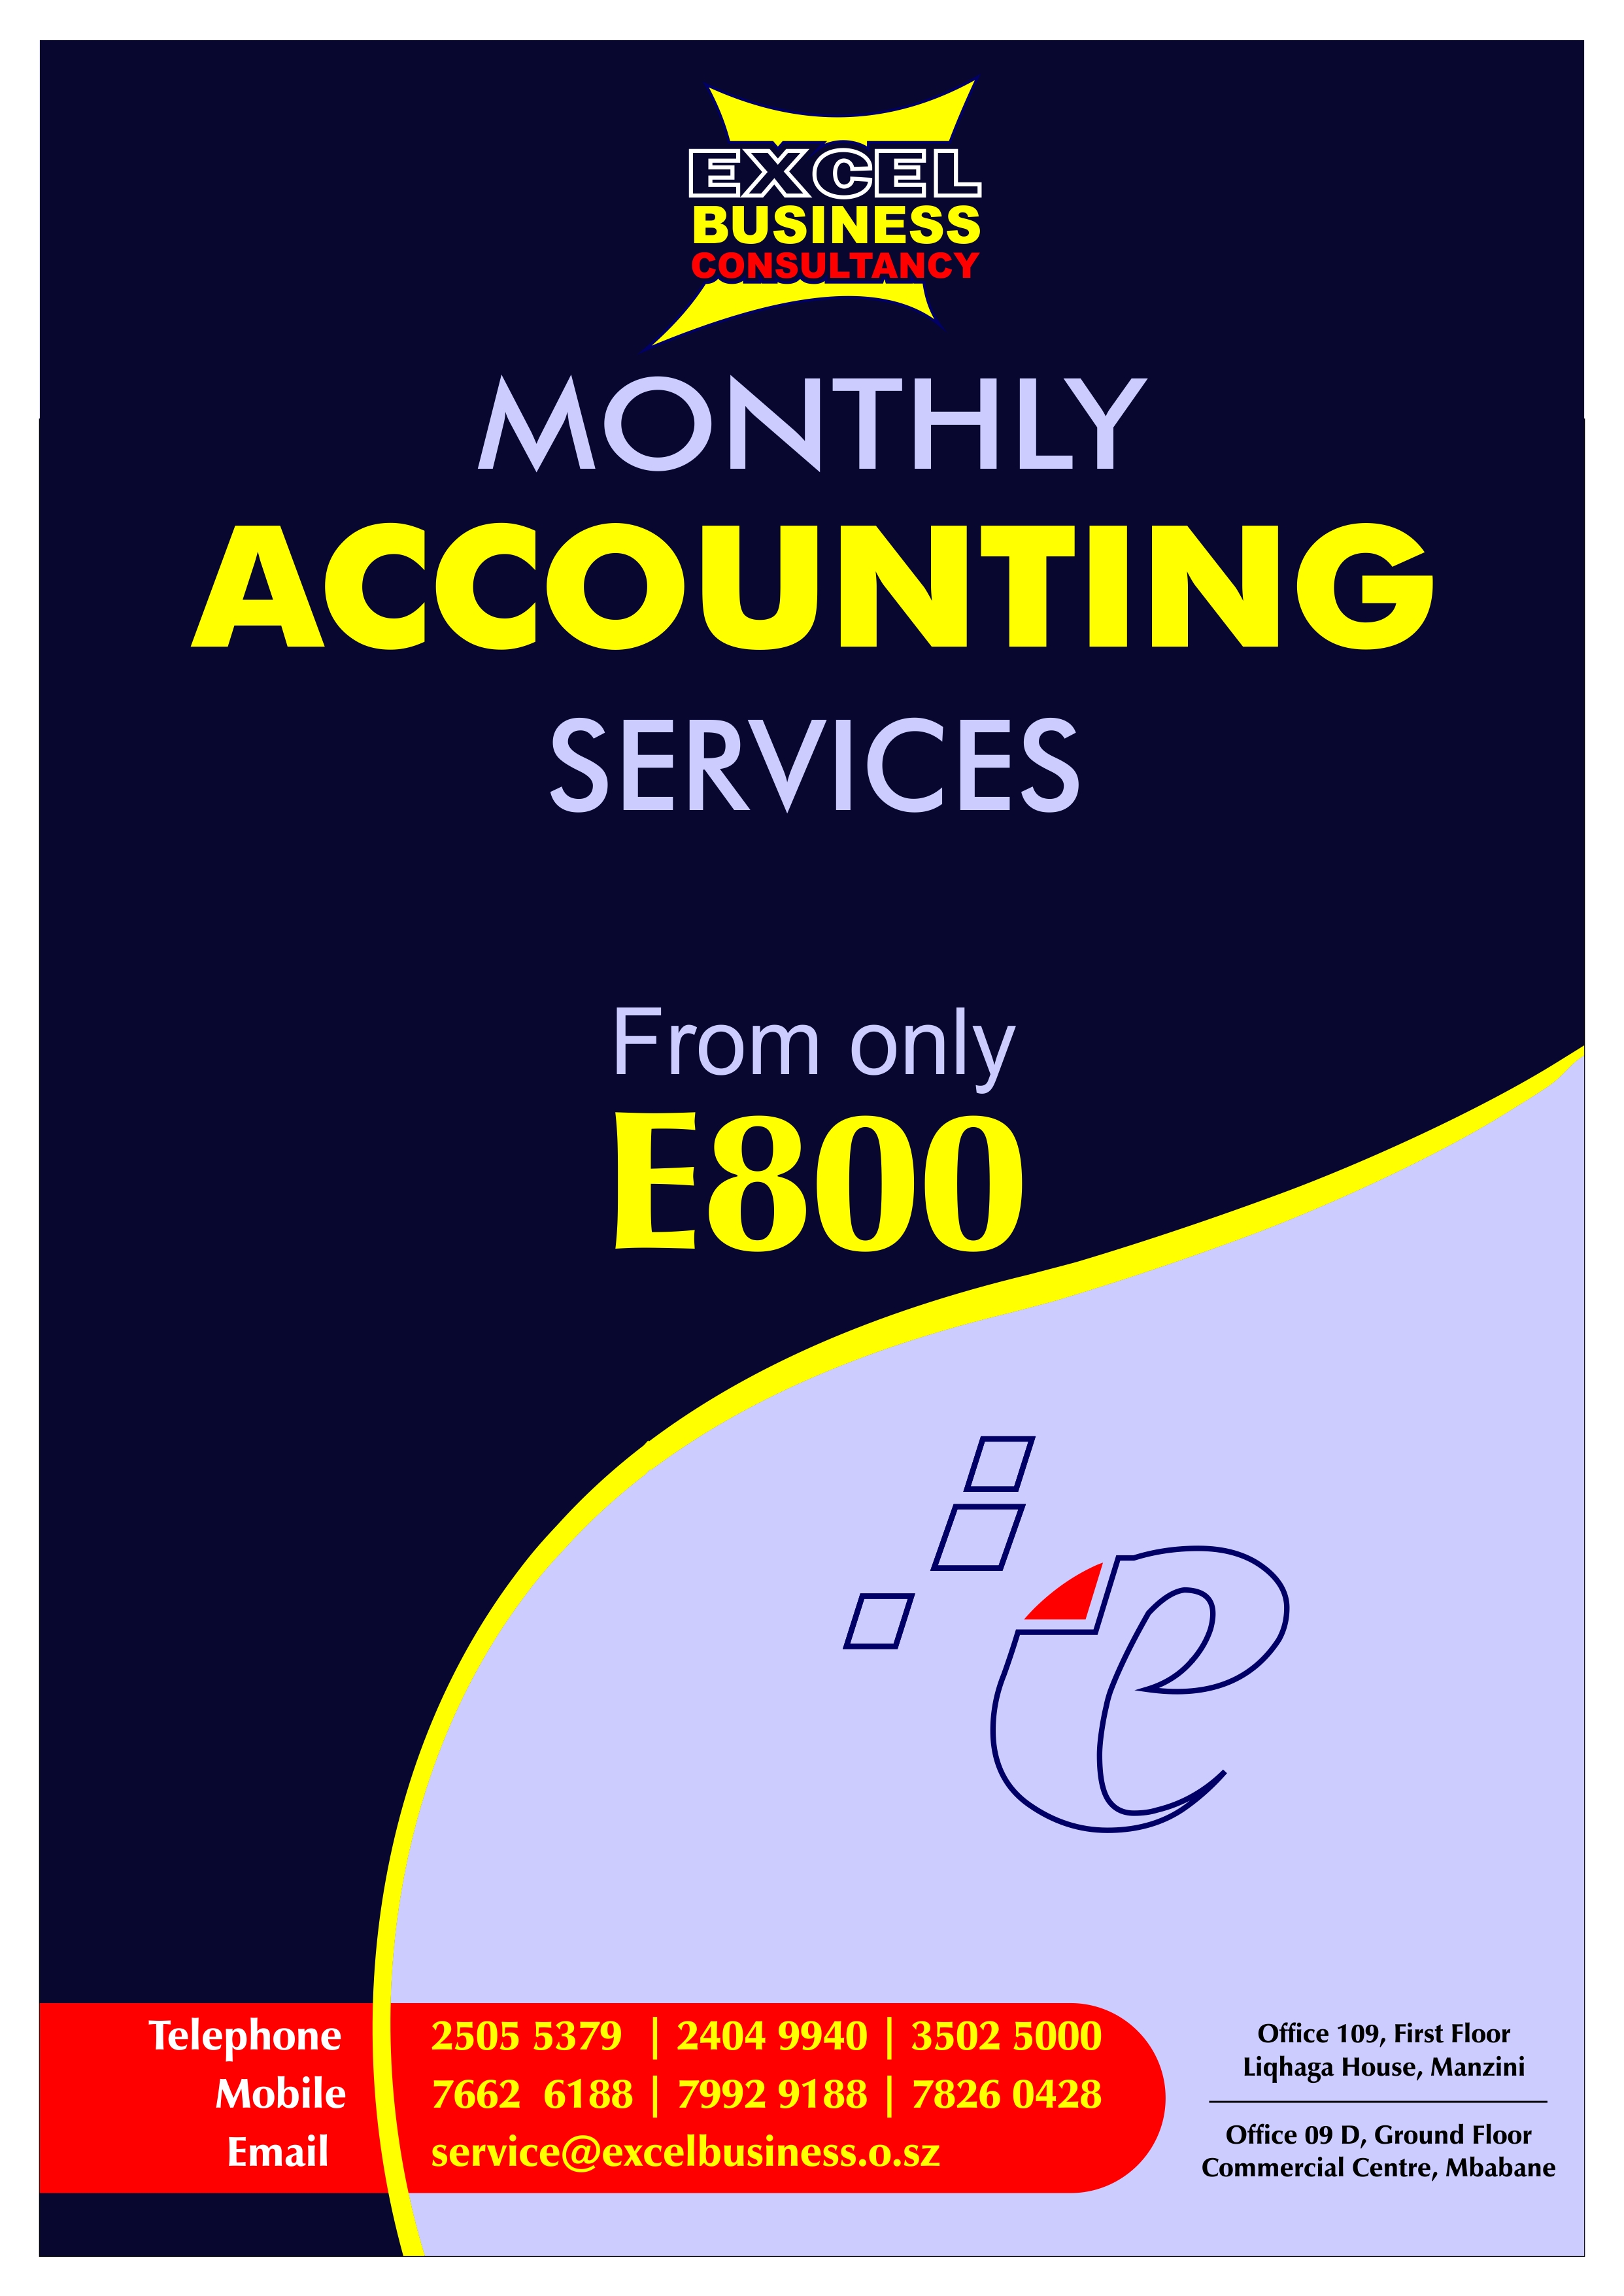 Excel Monthly Accounting Services Ad 1